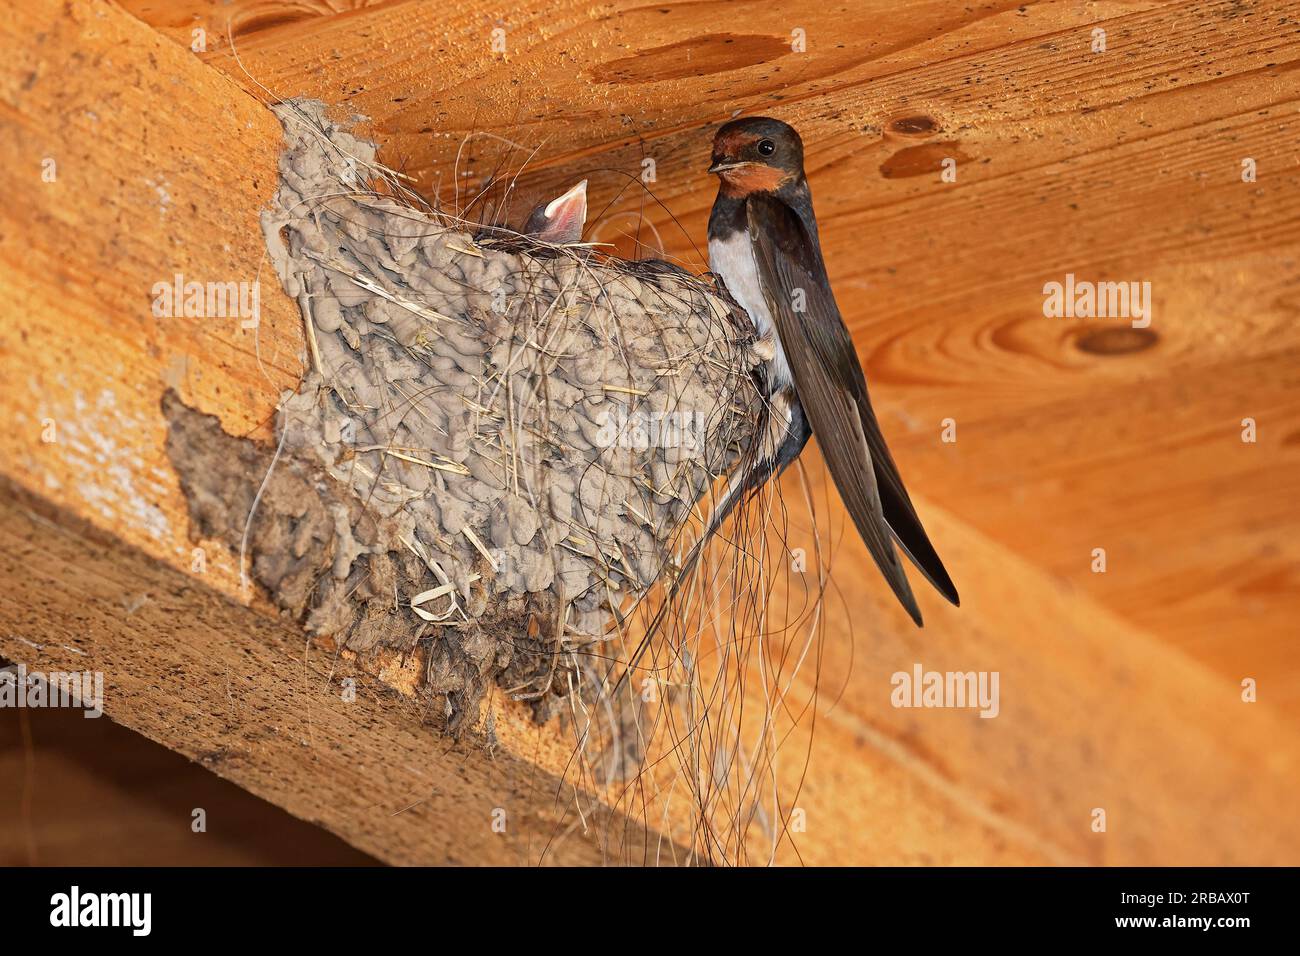 Barn swallow (Hirundo rustica) sitting at nest with young, Schleswig-Holstein, Germany Stock Photo